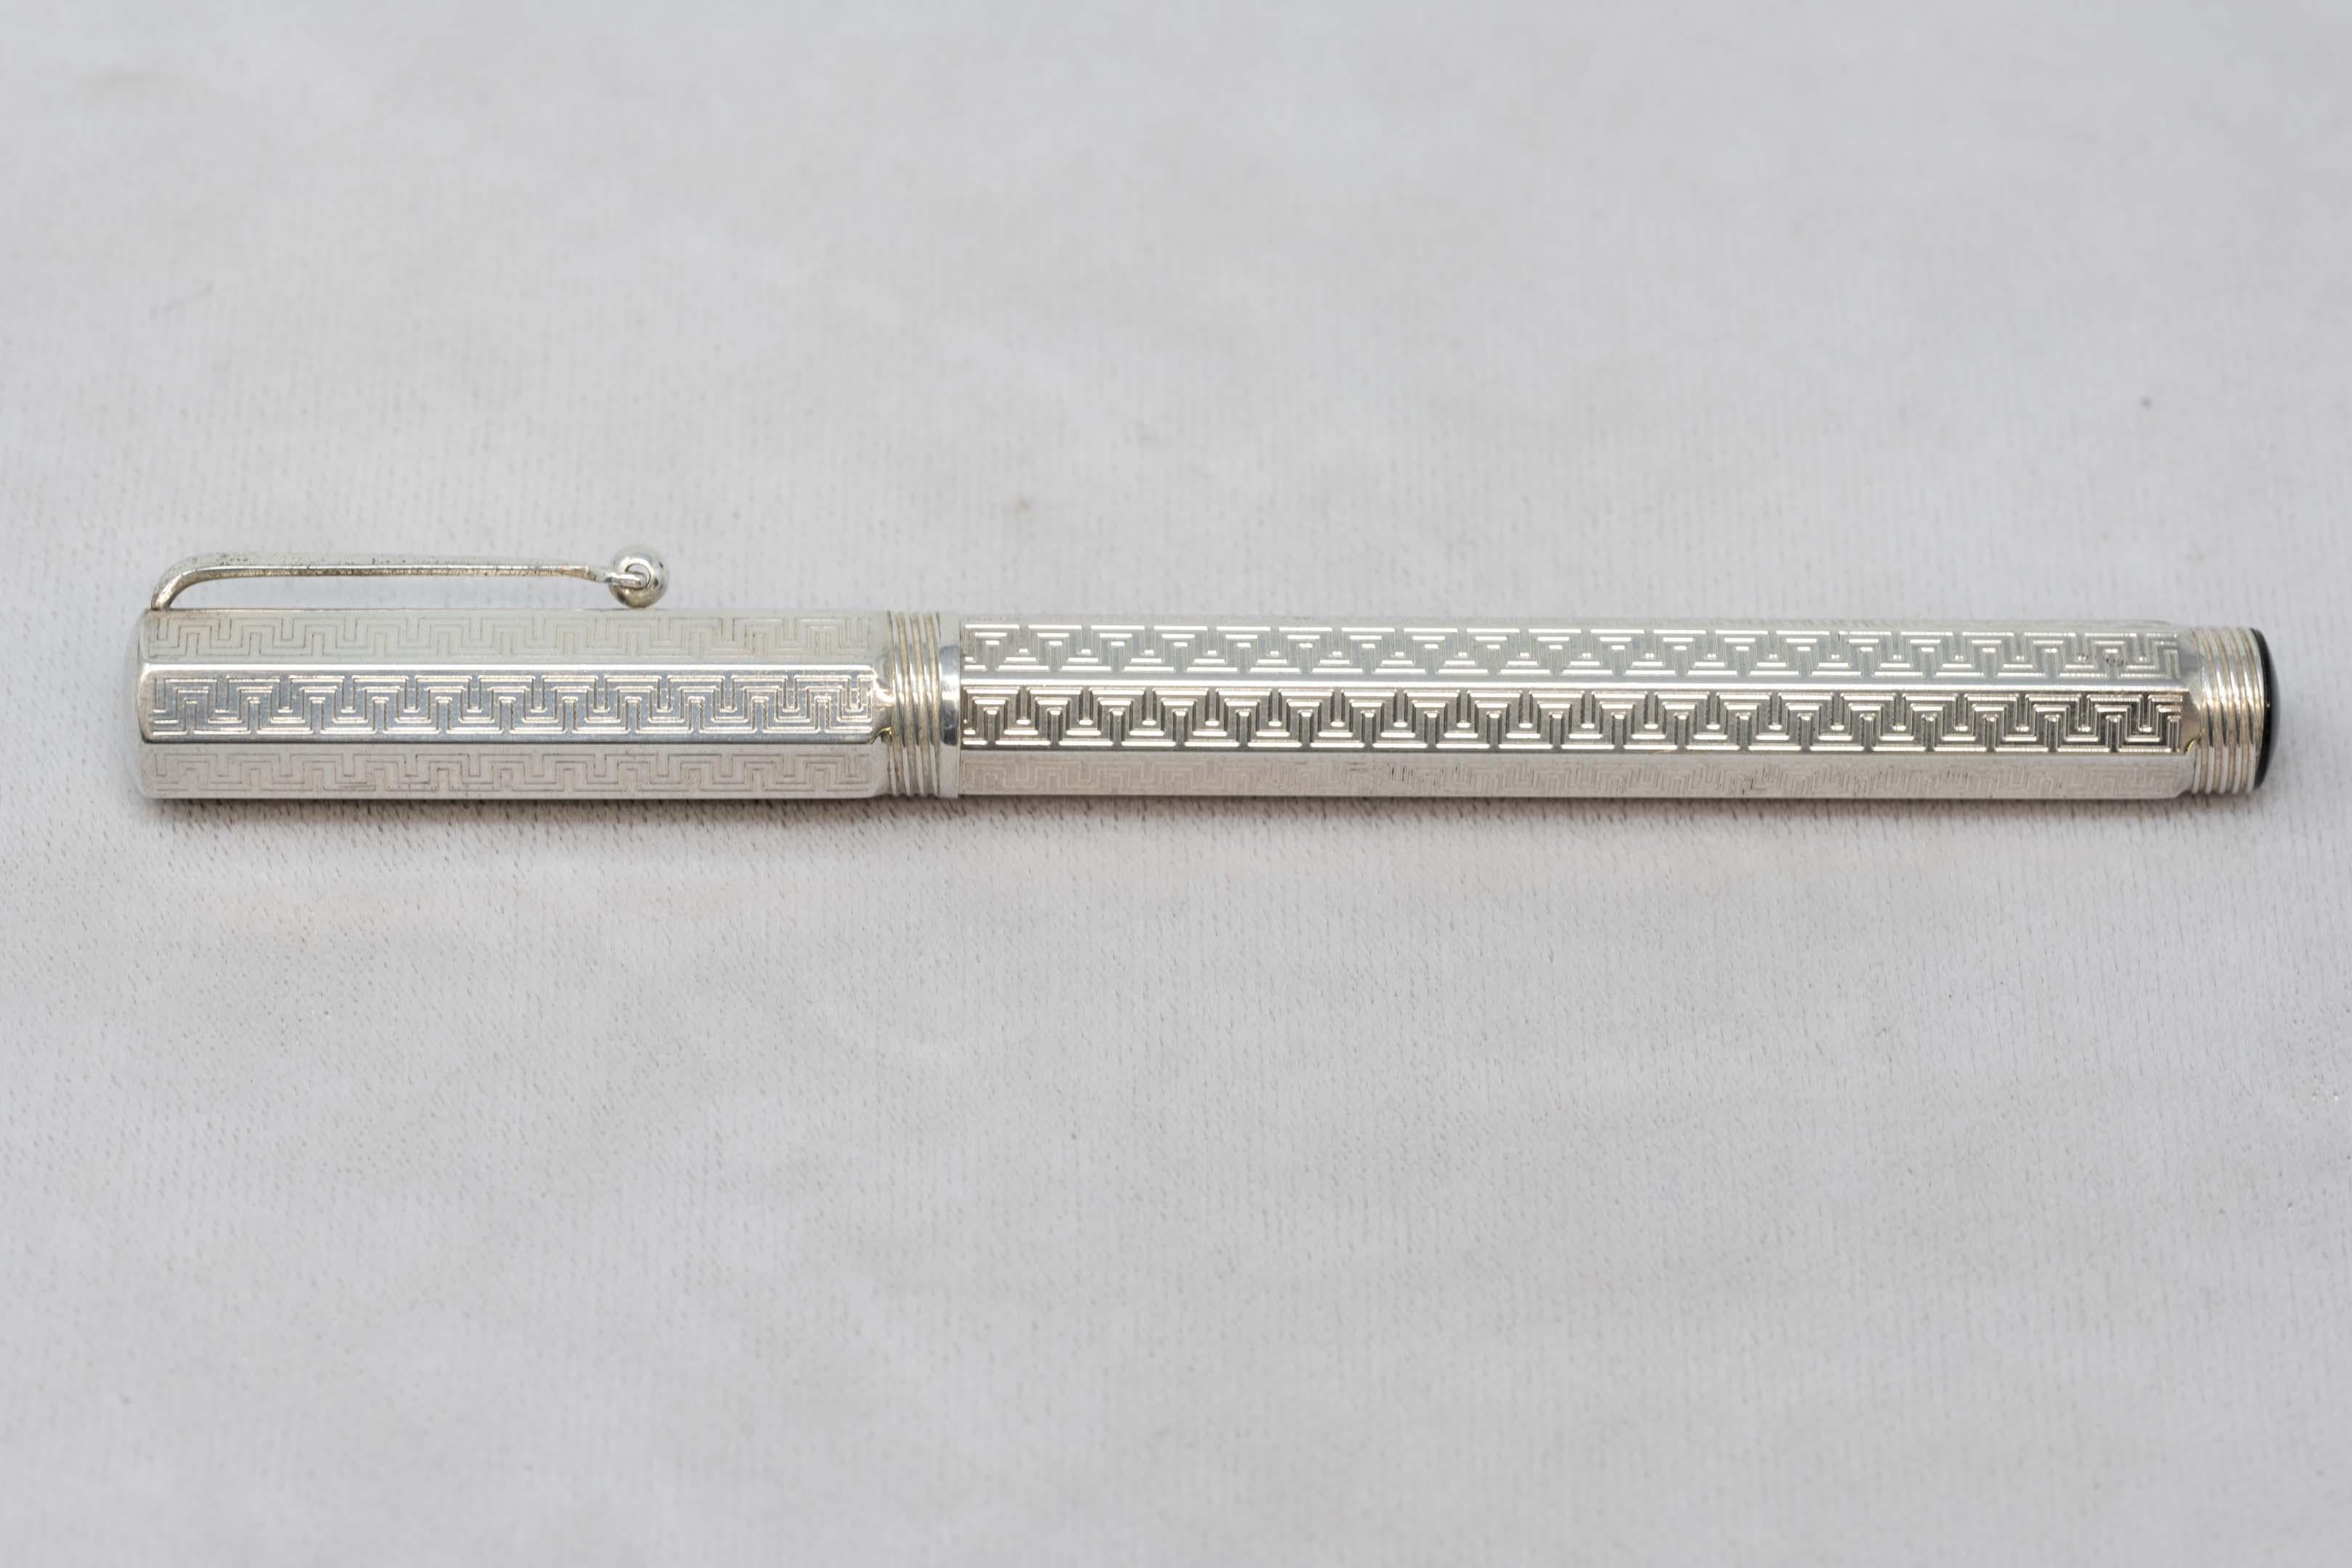 Montegrappa reminiscence fountain pen made in solid sterling silver marked. Nib is marked 585, Made in Vicenza Italy. Pen measures 12.6 cm long, with no refill and no box. In good condition, with no scratches or imperfections, and no engravings.